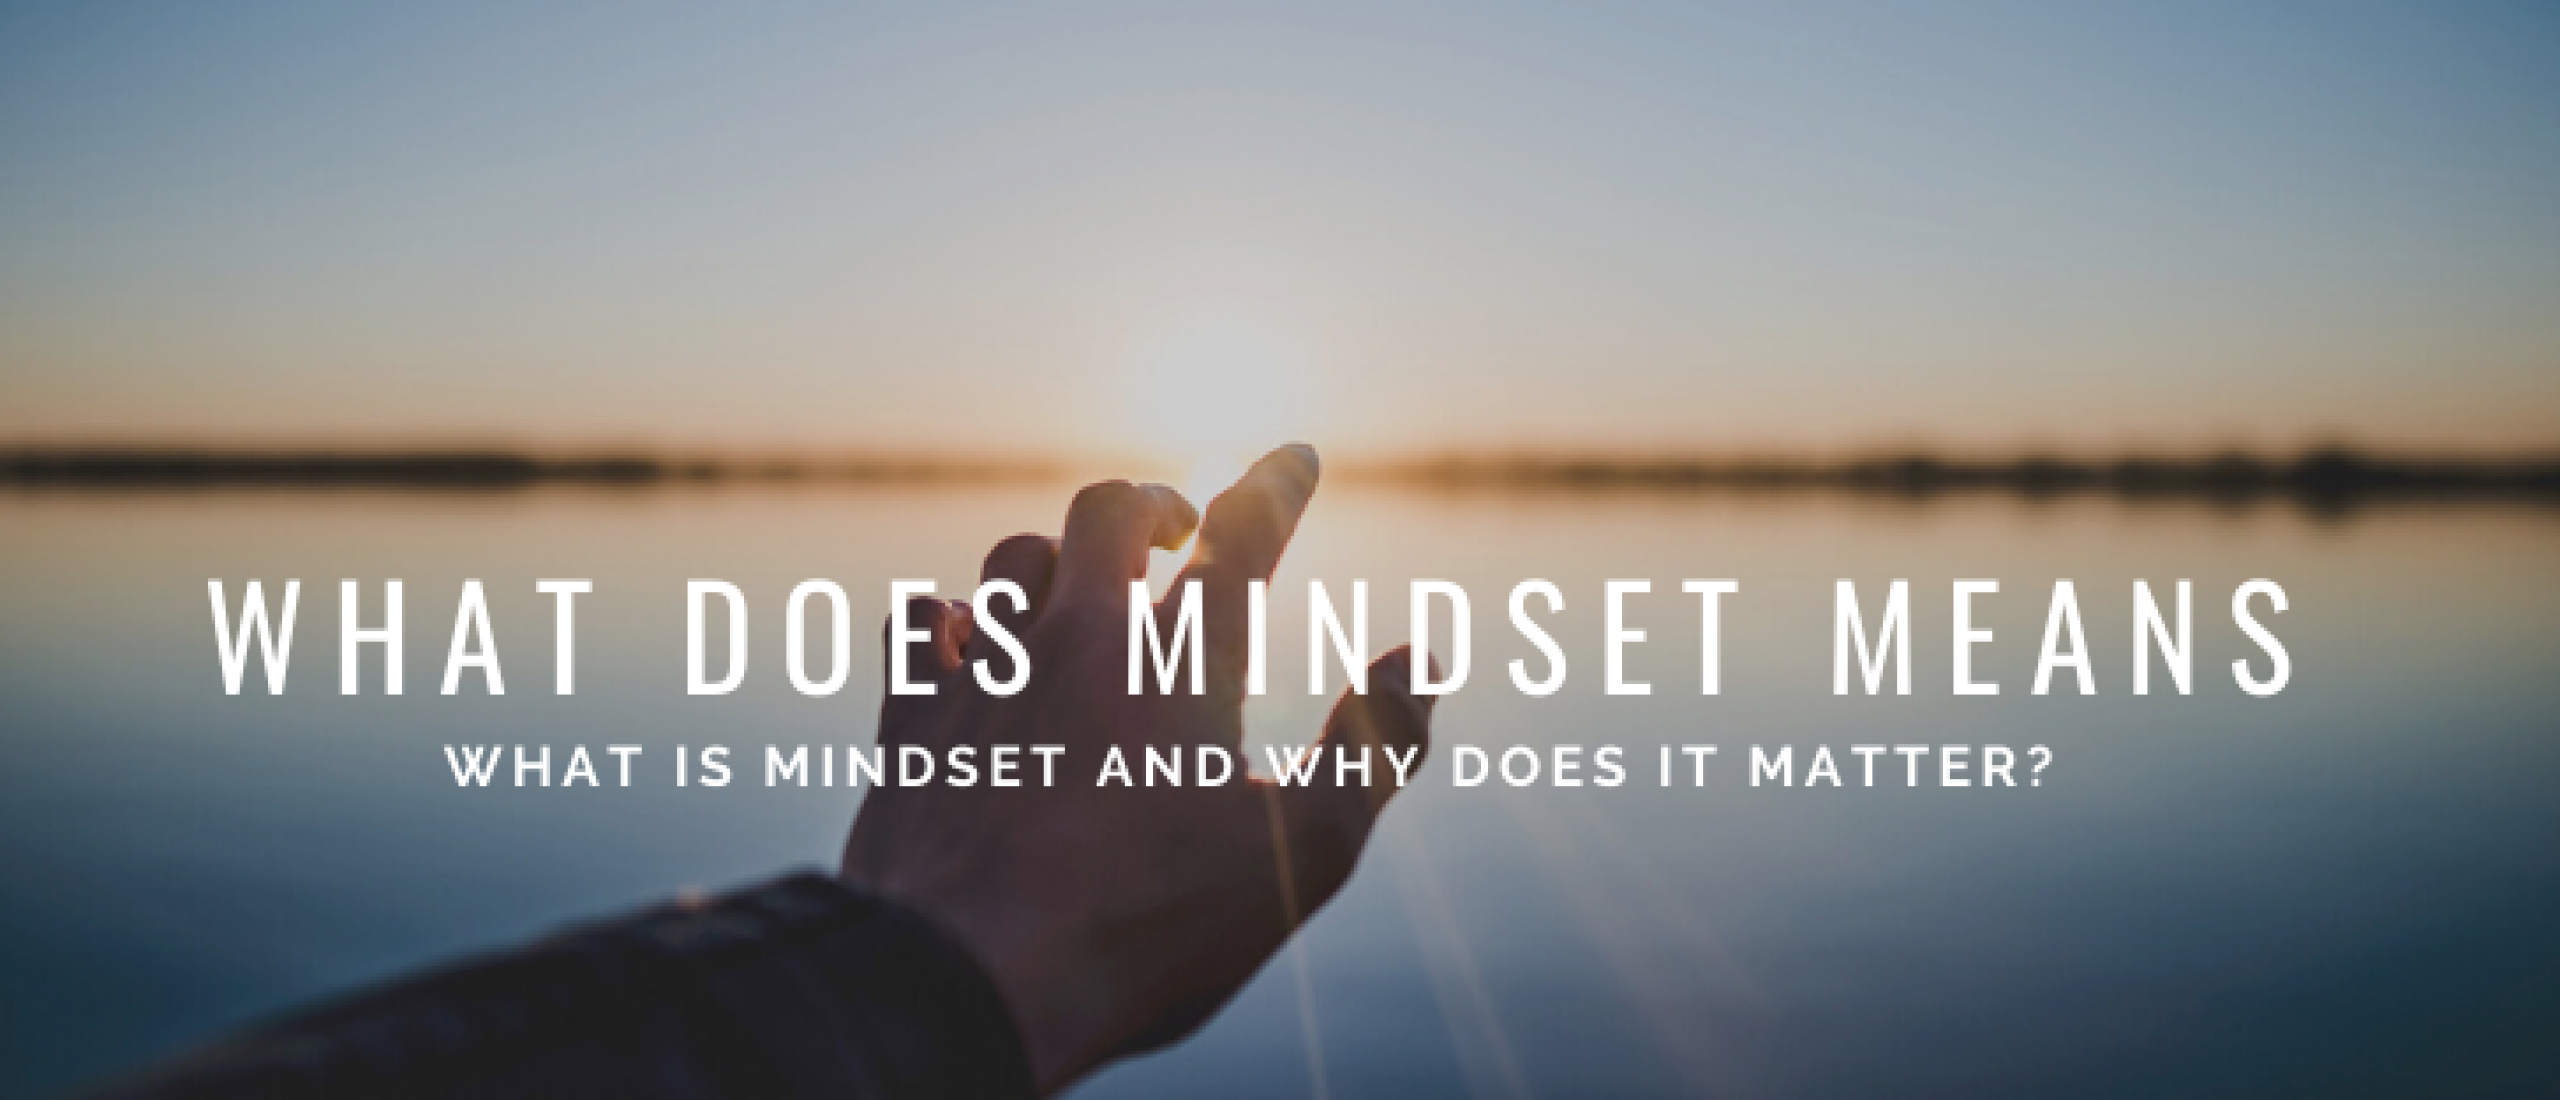 What Does Mindset Mean? Examples and Why it Matters